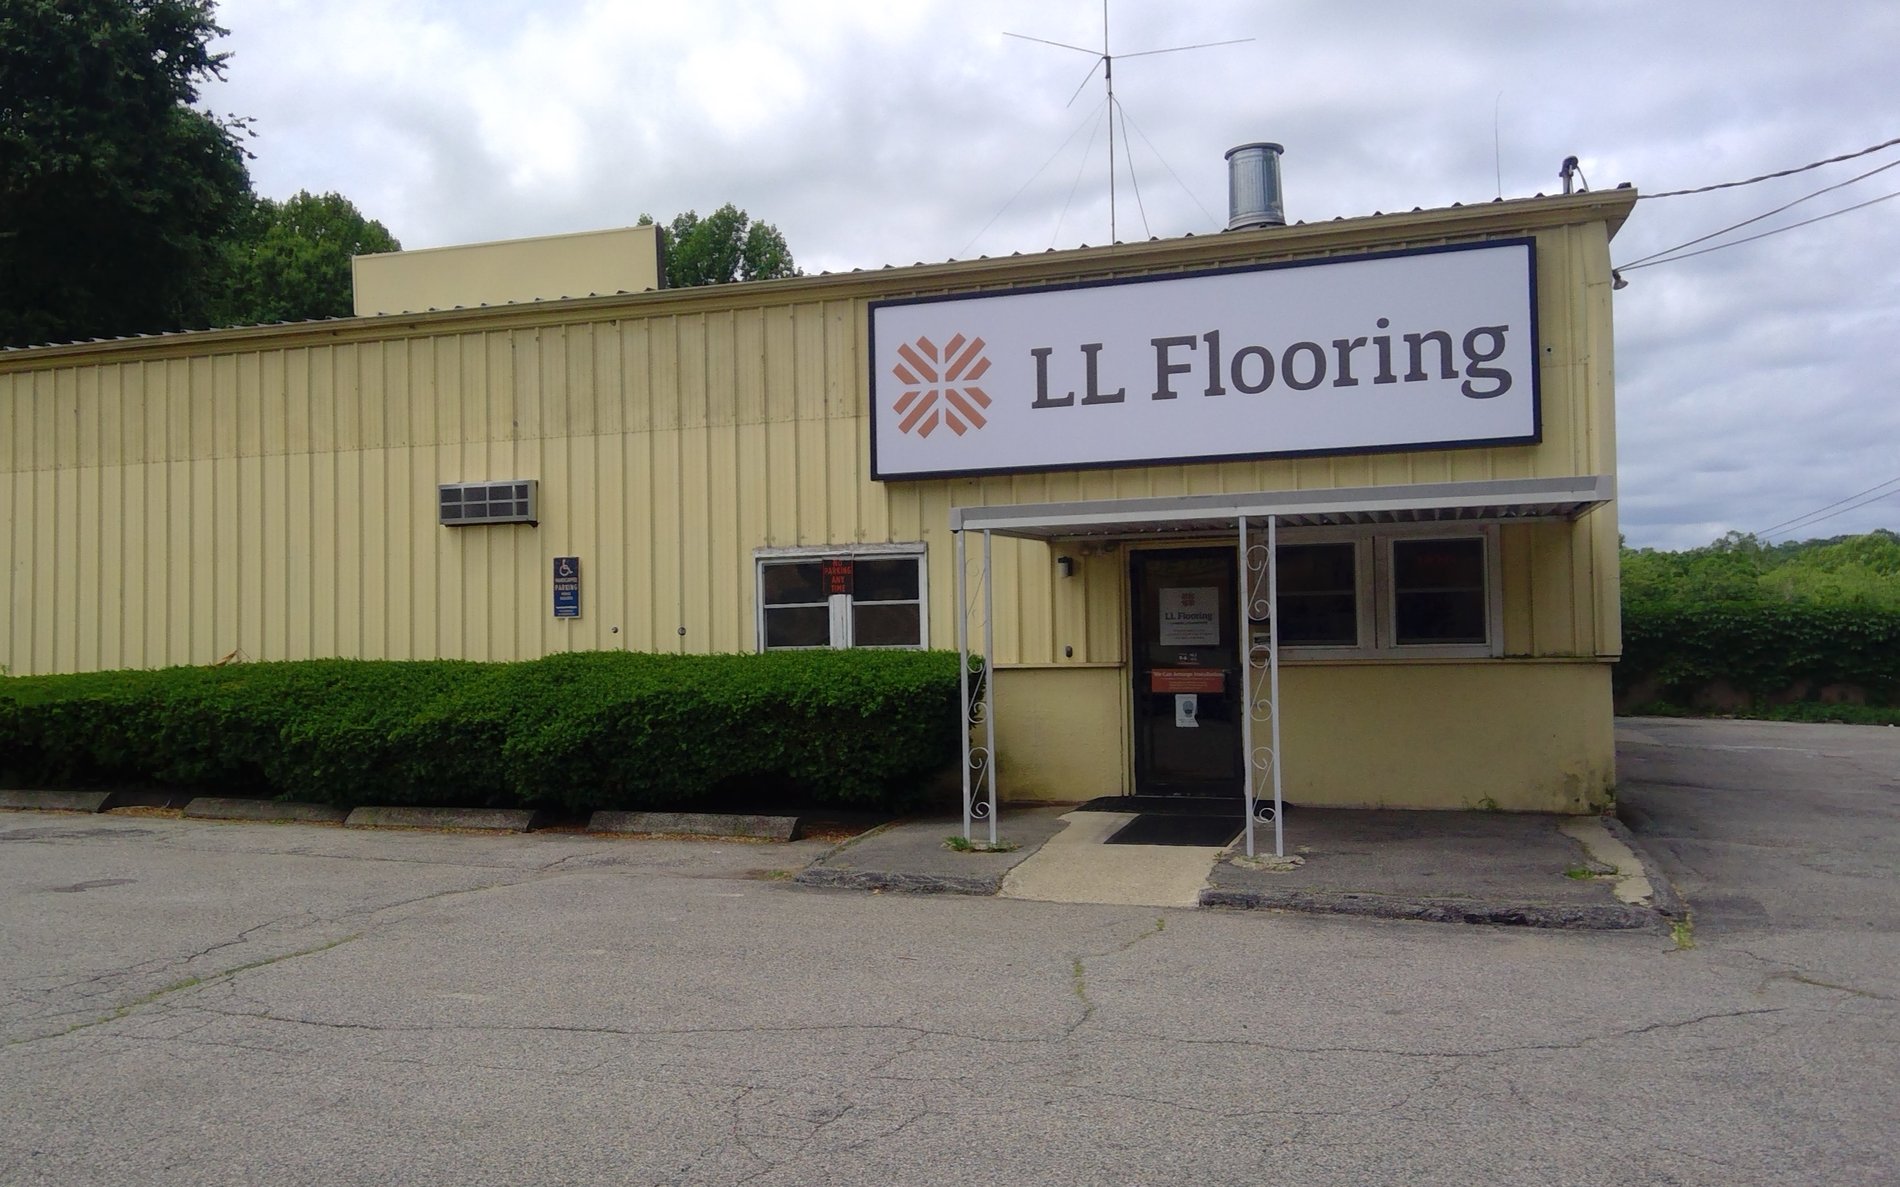 LL Flooring #1215 Waterford | 150 Cross Road | Storefront